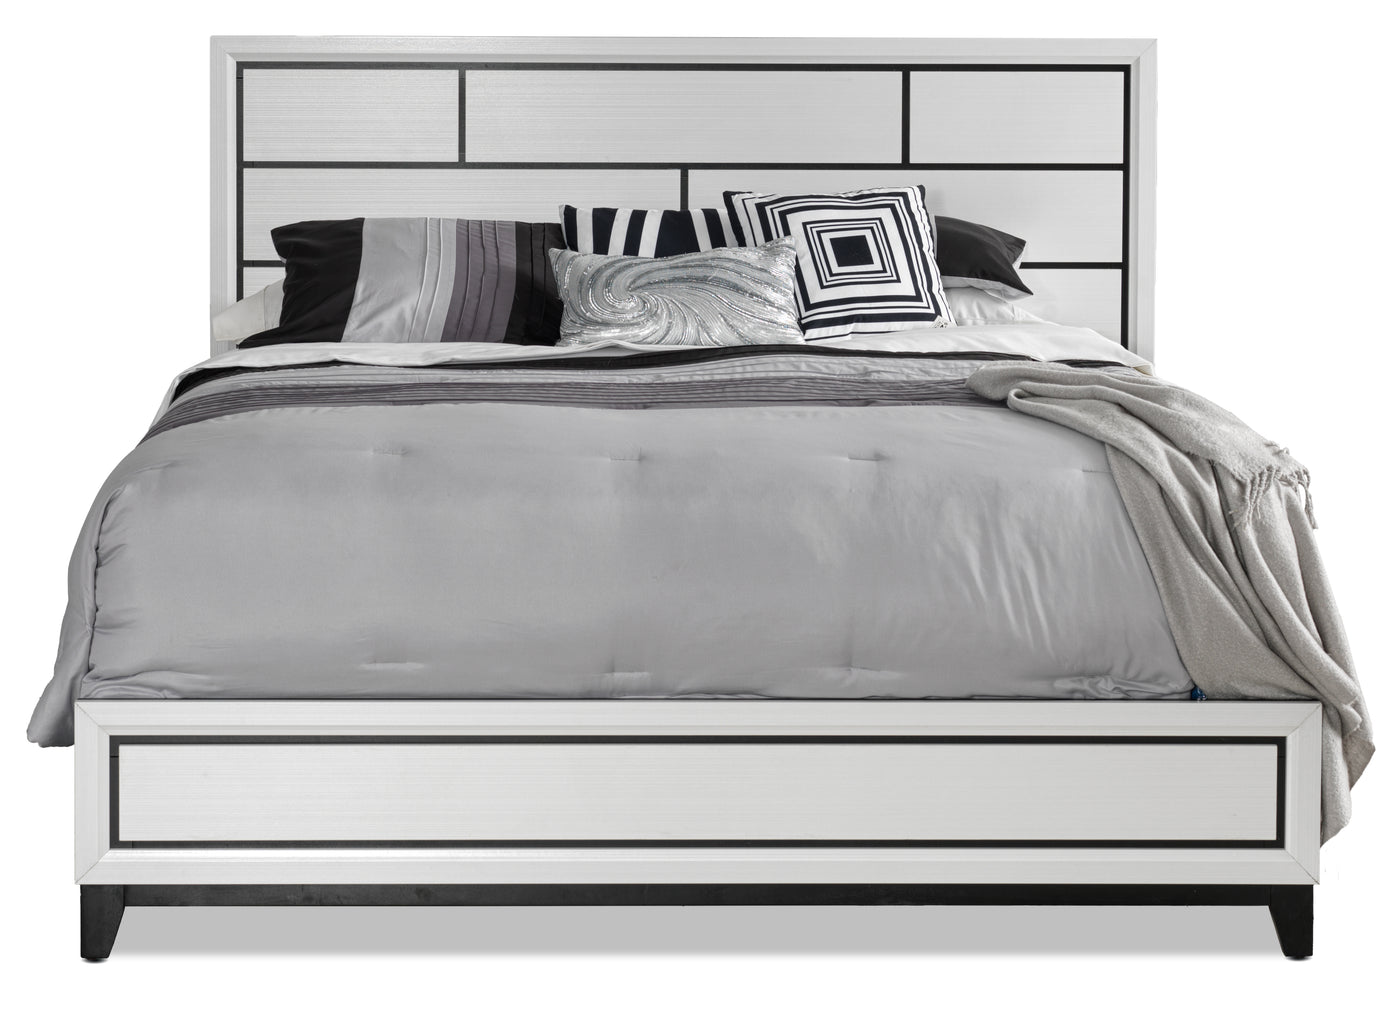 Frost 3-Piece Queen Bed - White, Black